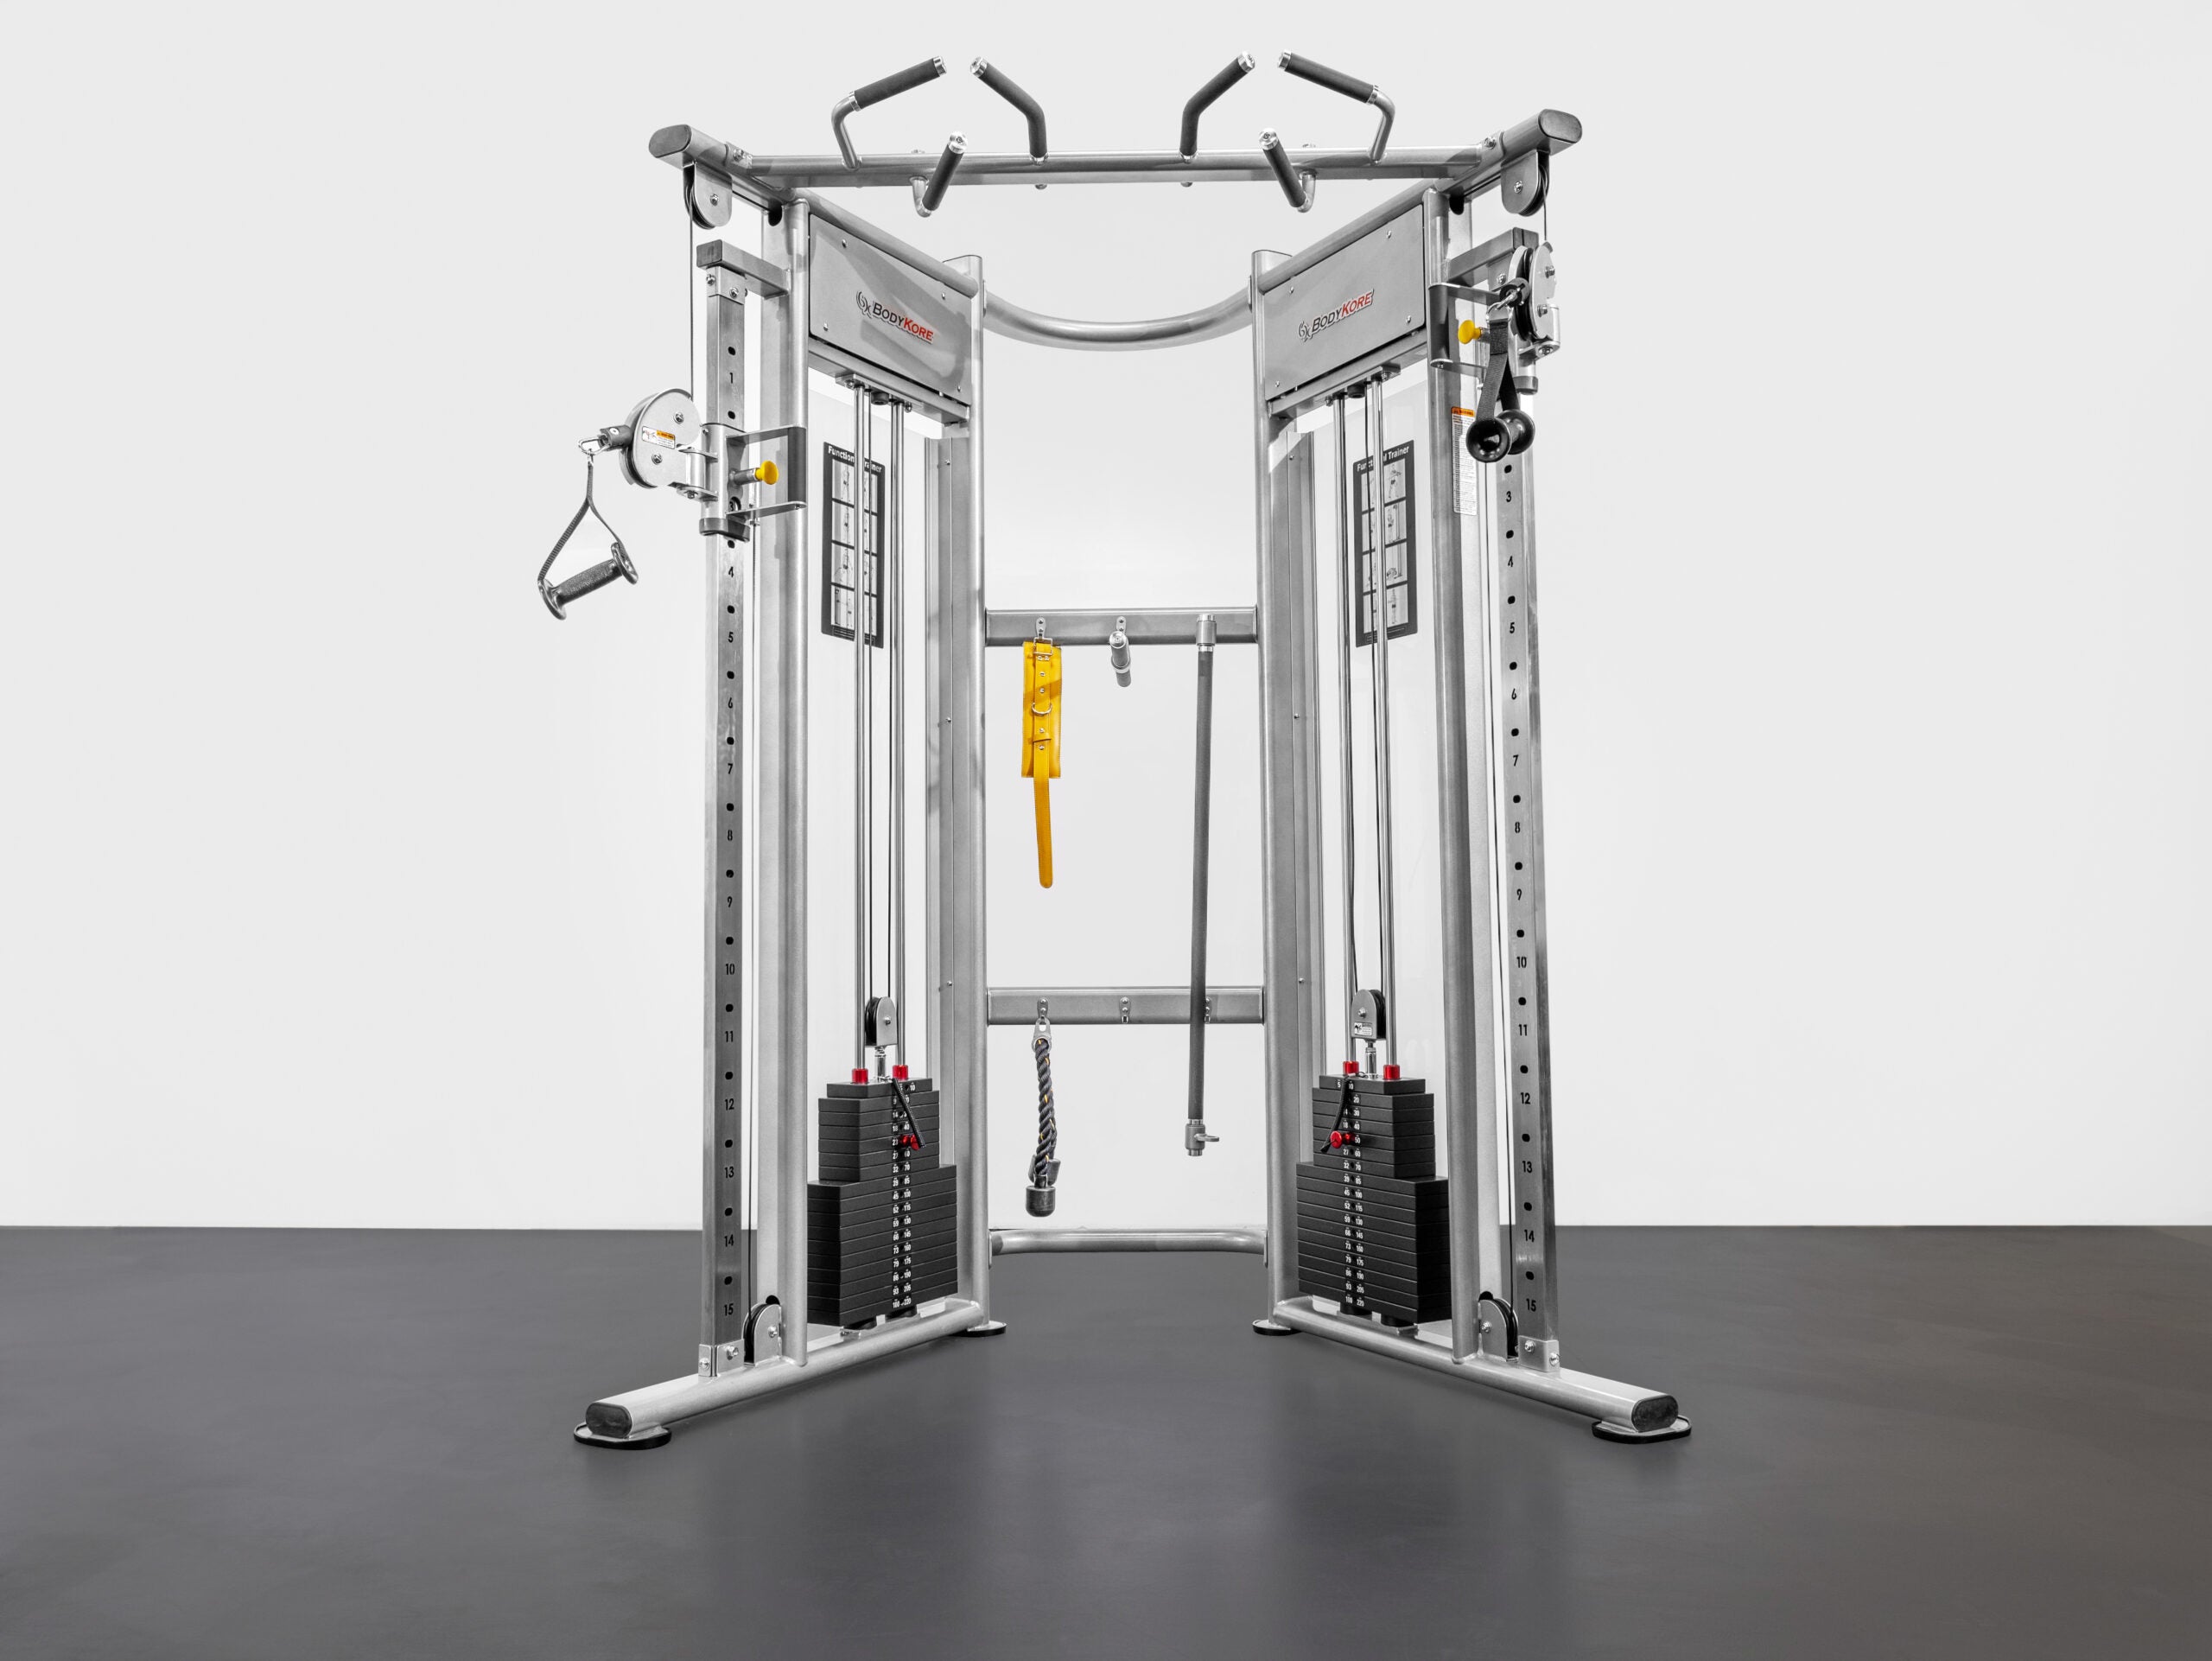 Functional Trainer - Double Stack 2:1 Split Weight